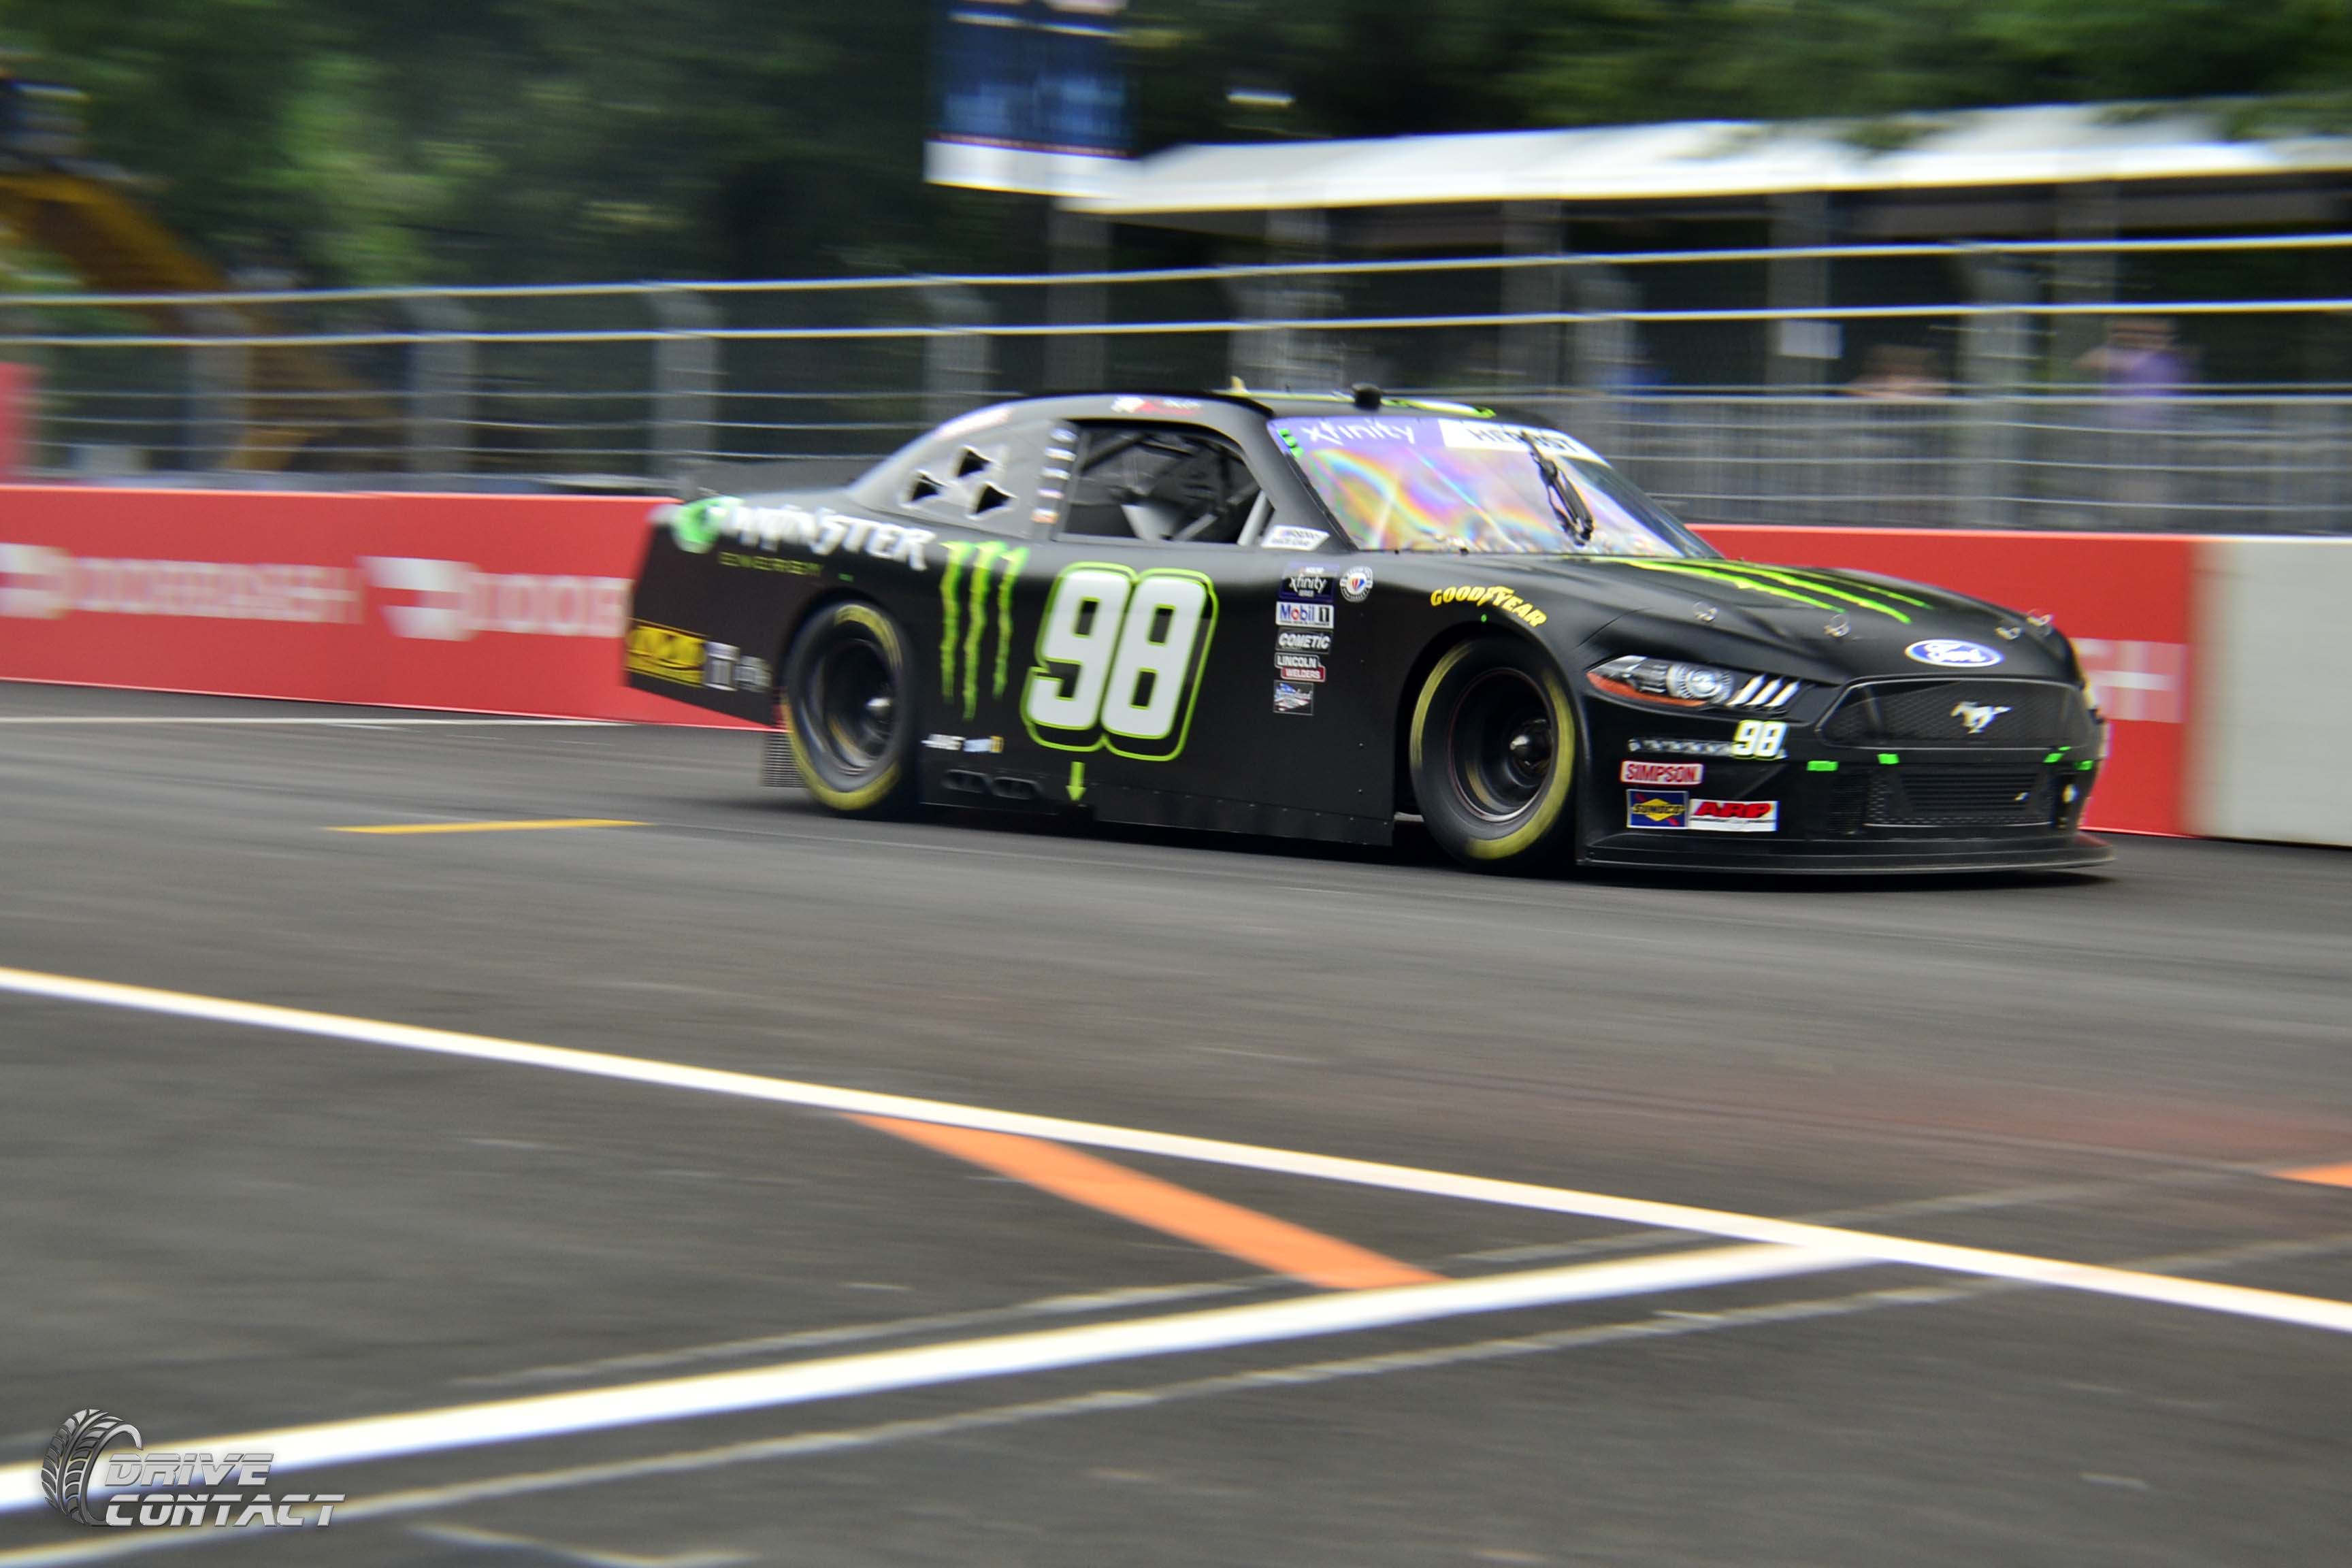 Riley Herbst will drive the No. 98 Monster Energy Ford